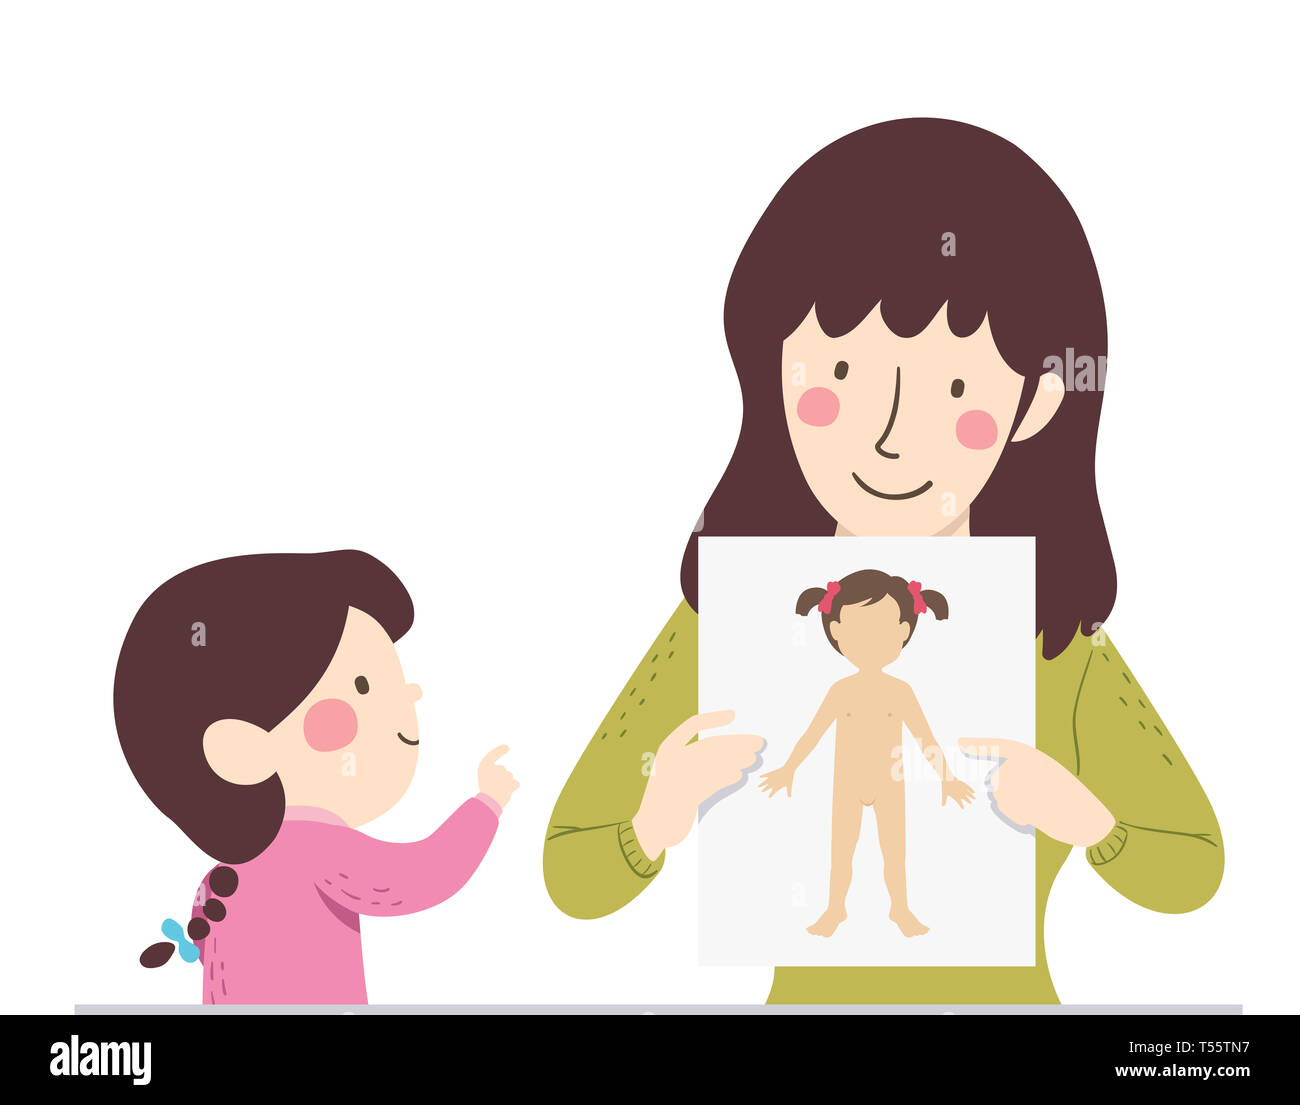 sağlam casus Ruhban  Illustration of a Mother Teaching Her Kid Girl About Female Body Parts  Stock Photo - Alamy